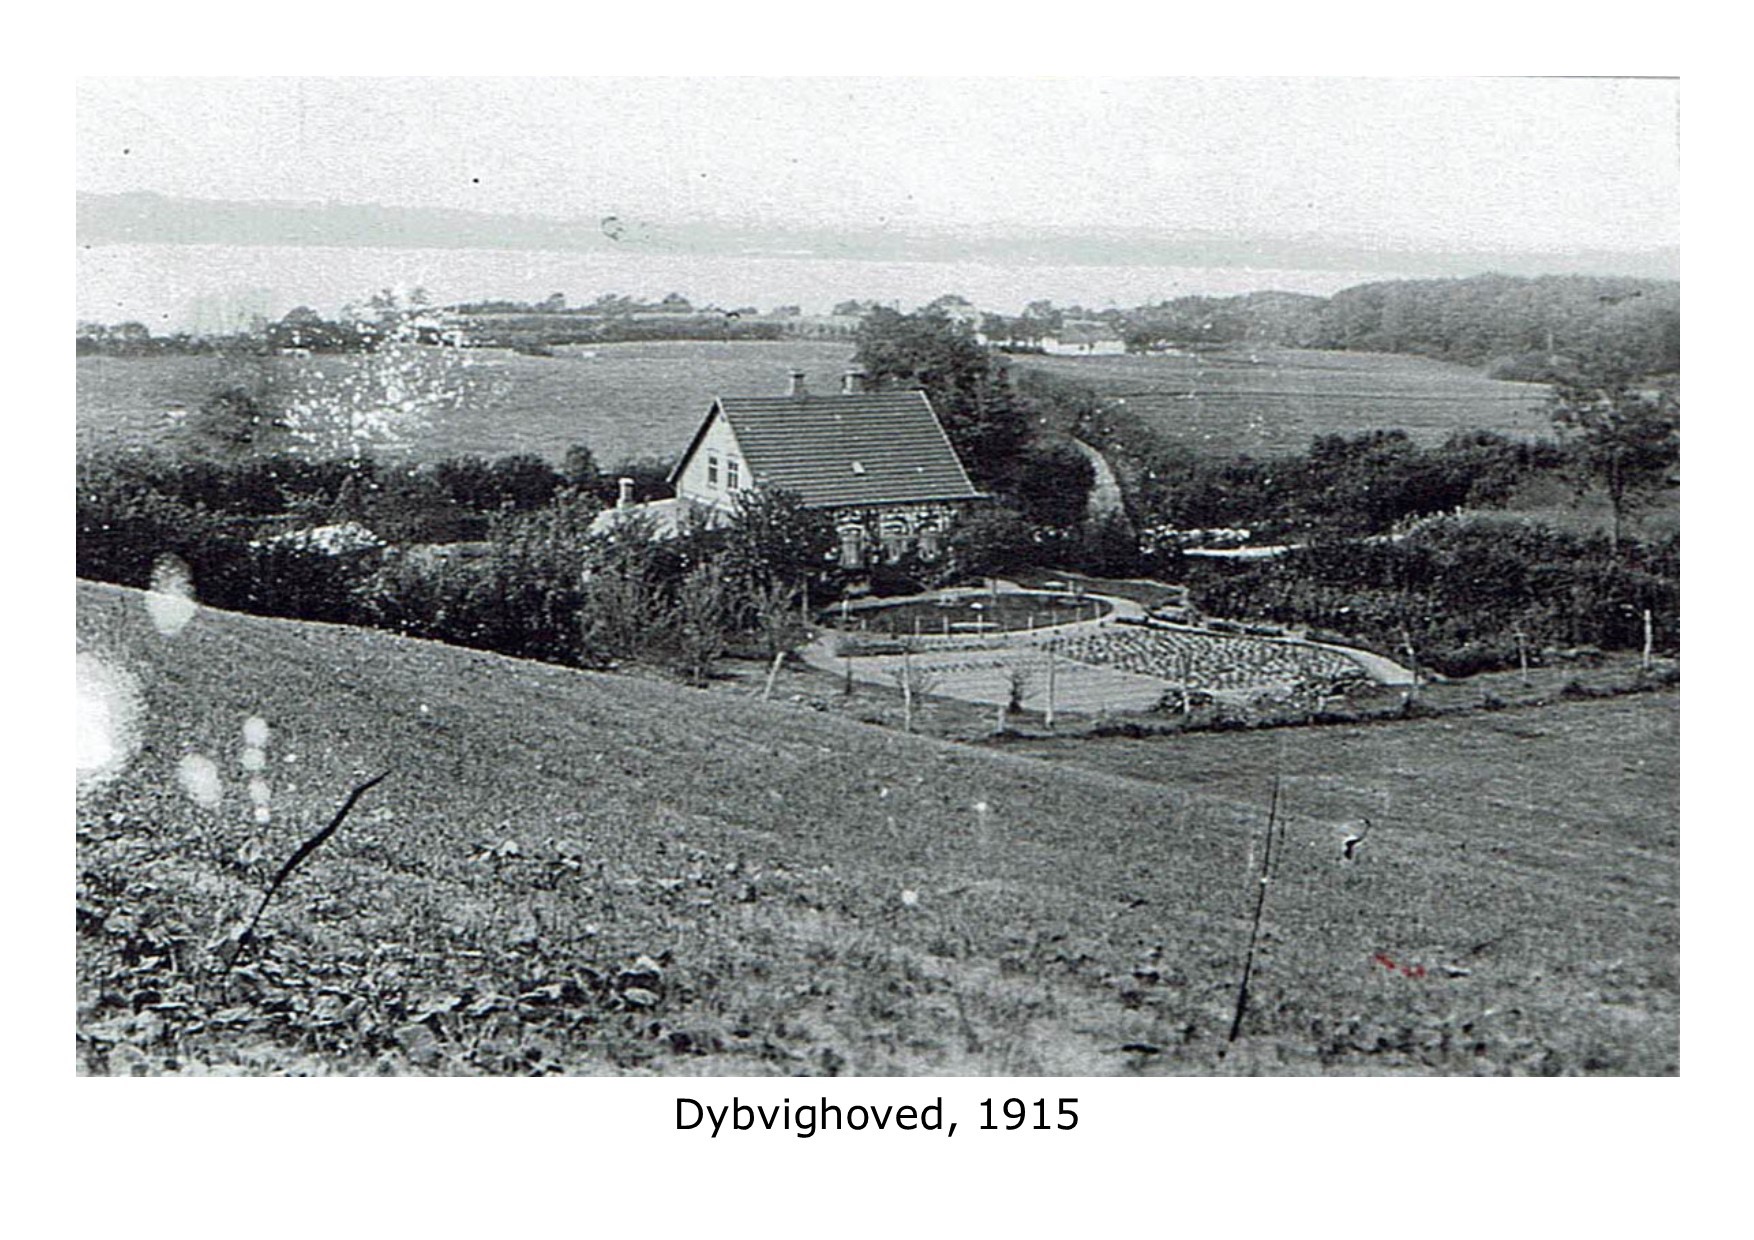 Dybvighoved 1915 